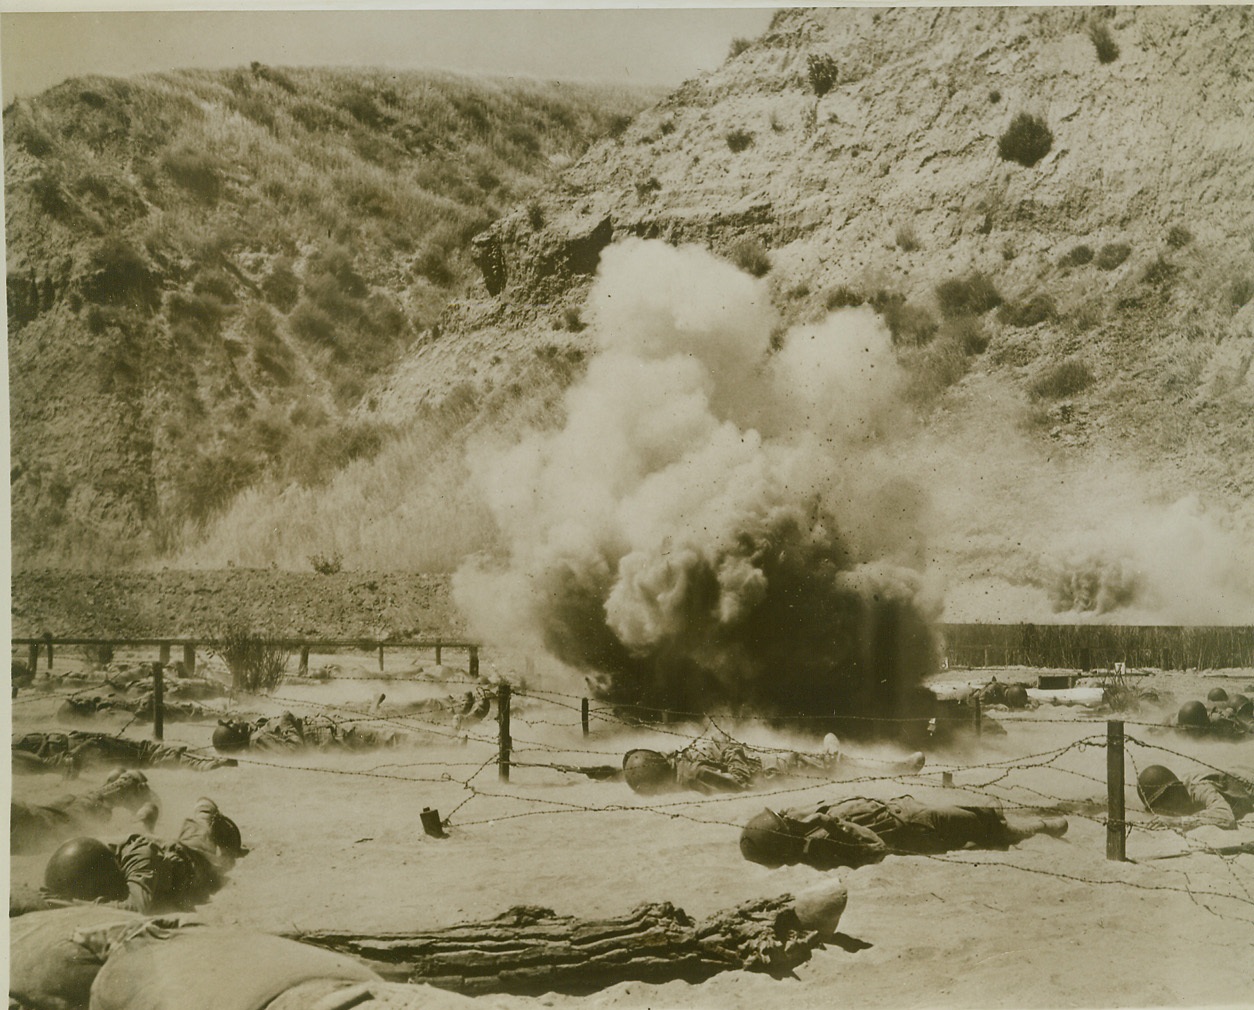 This is War – Almost, 6/24/1943. CAMP ROBERTS, CALIF. – Actual battle will hold few surprises and no fears for trainees schooled at Camp Roberts, for they “fight” under realistic battle conditions on the Camp’s new infiltration course. These infantry trainees flatten themselves on the ground as live machine gun bullets cut the air a few inches above their heads and a land mine explodes right in their midst. Credit (U.S. Signal Corps Photo from ACME);